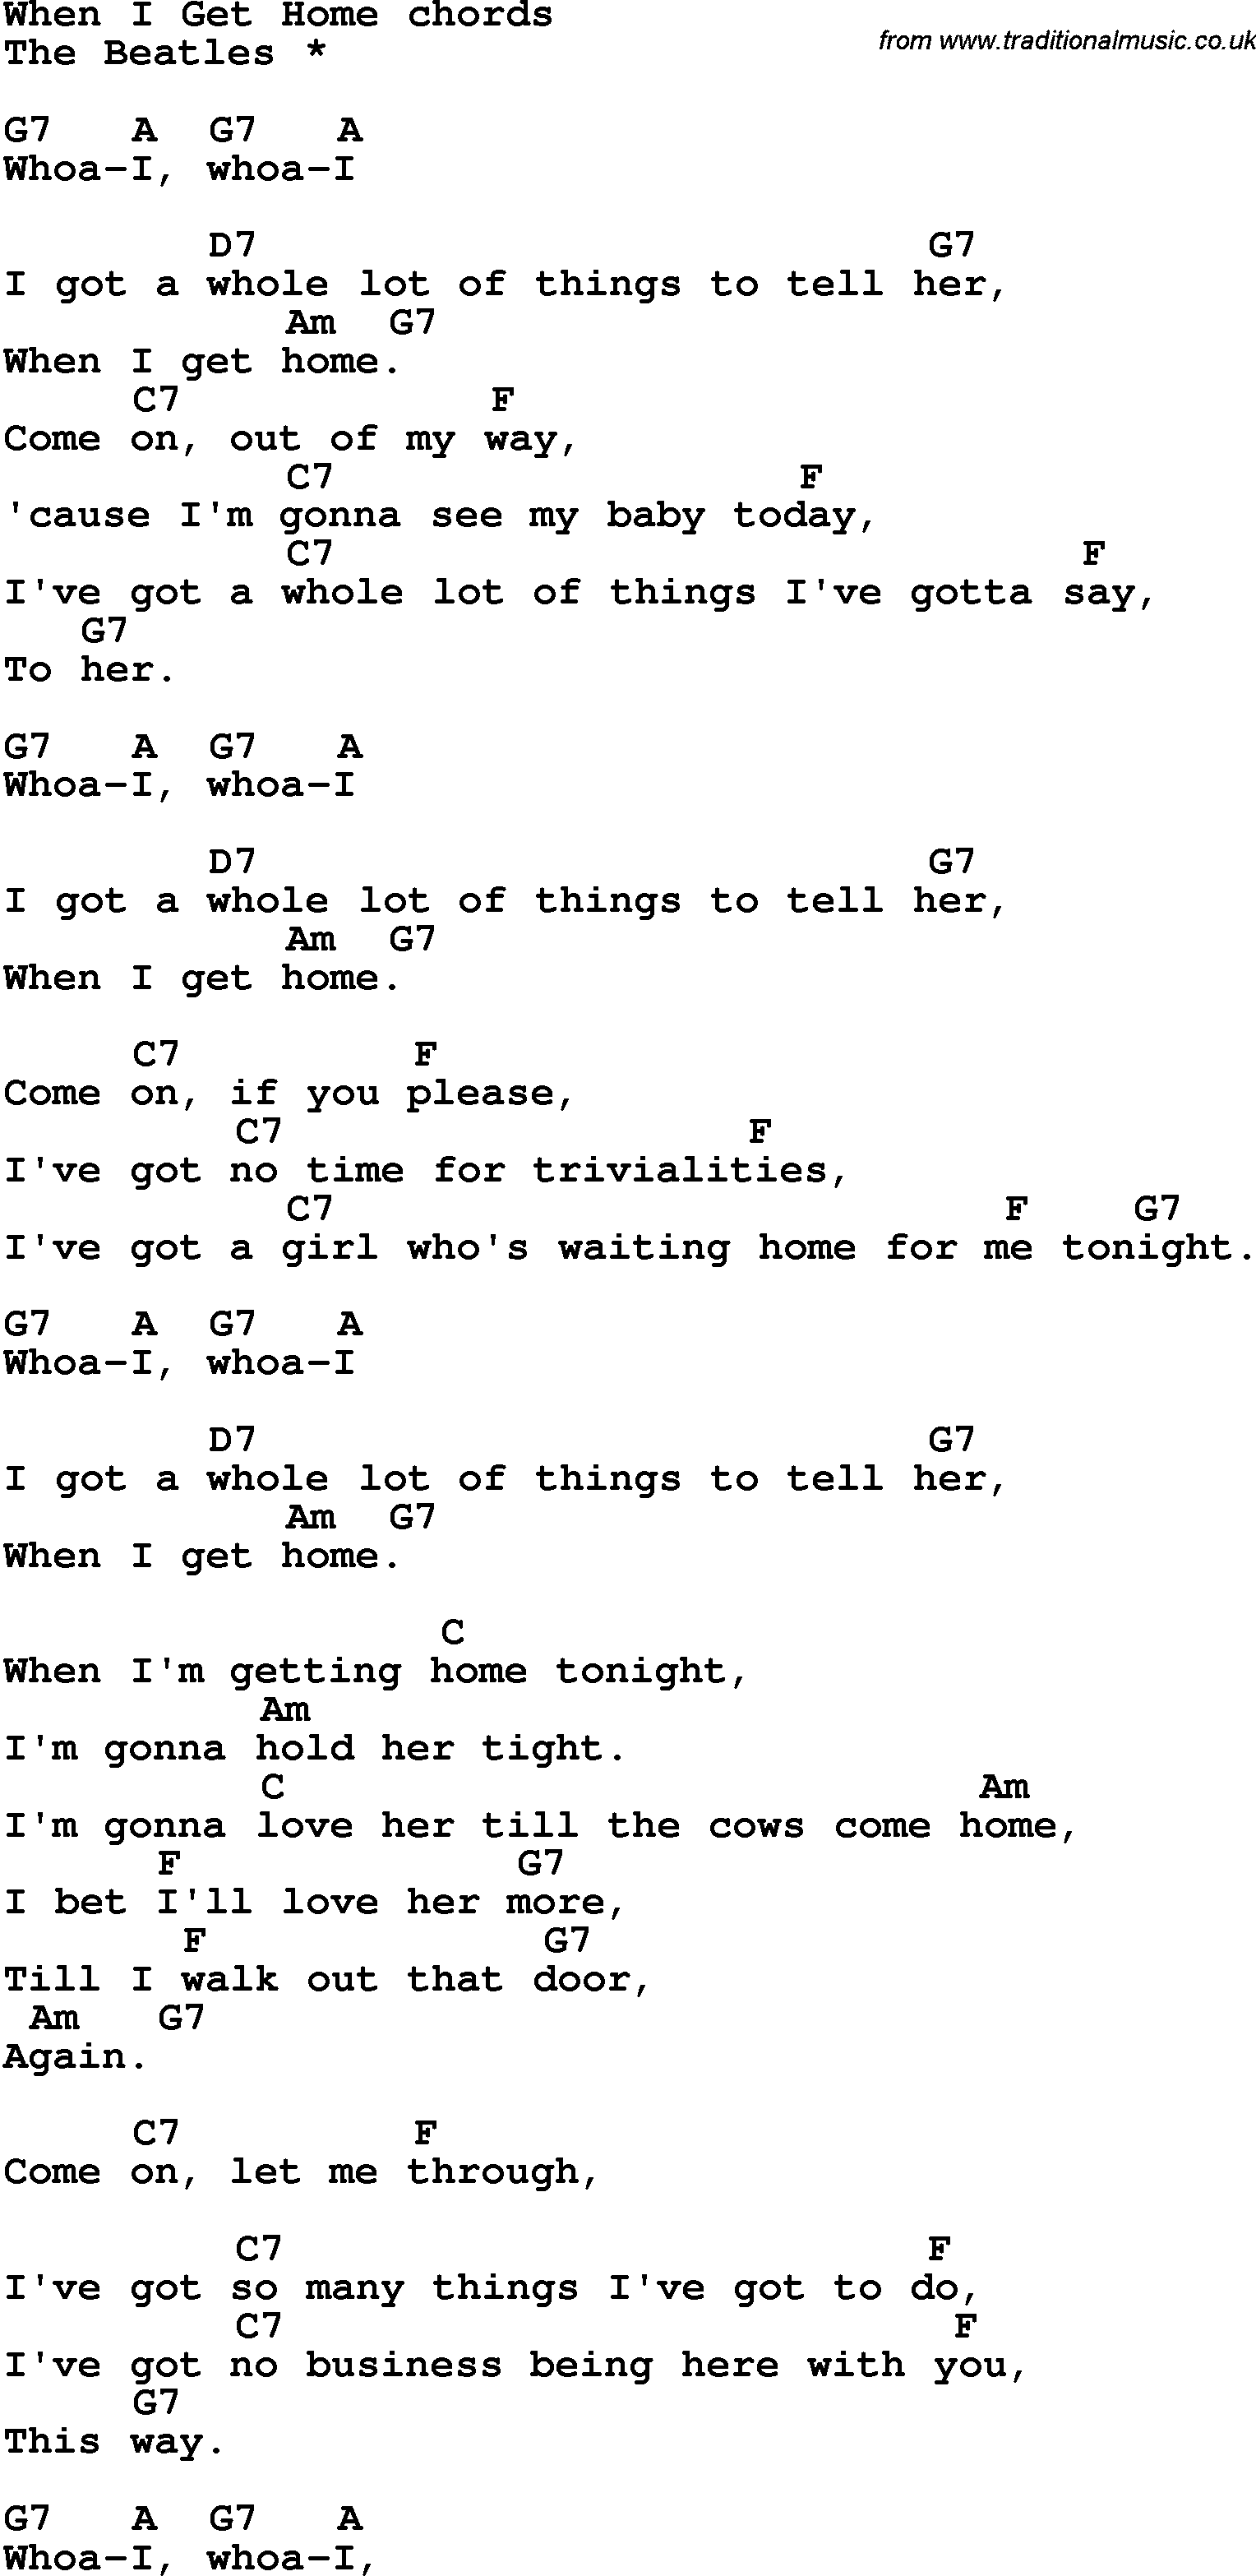 Song Lyrics with guitar chords for When I Get Home